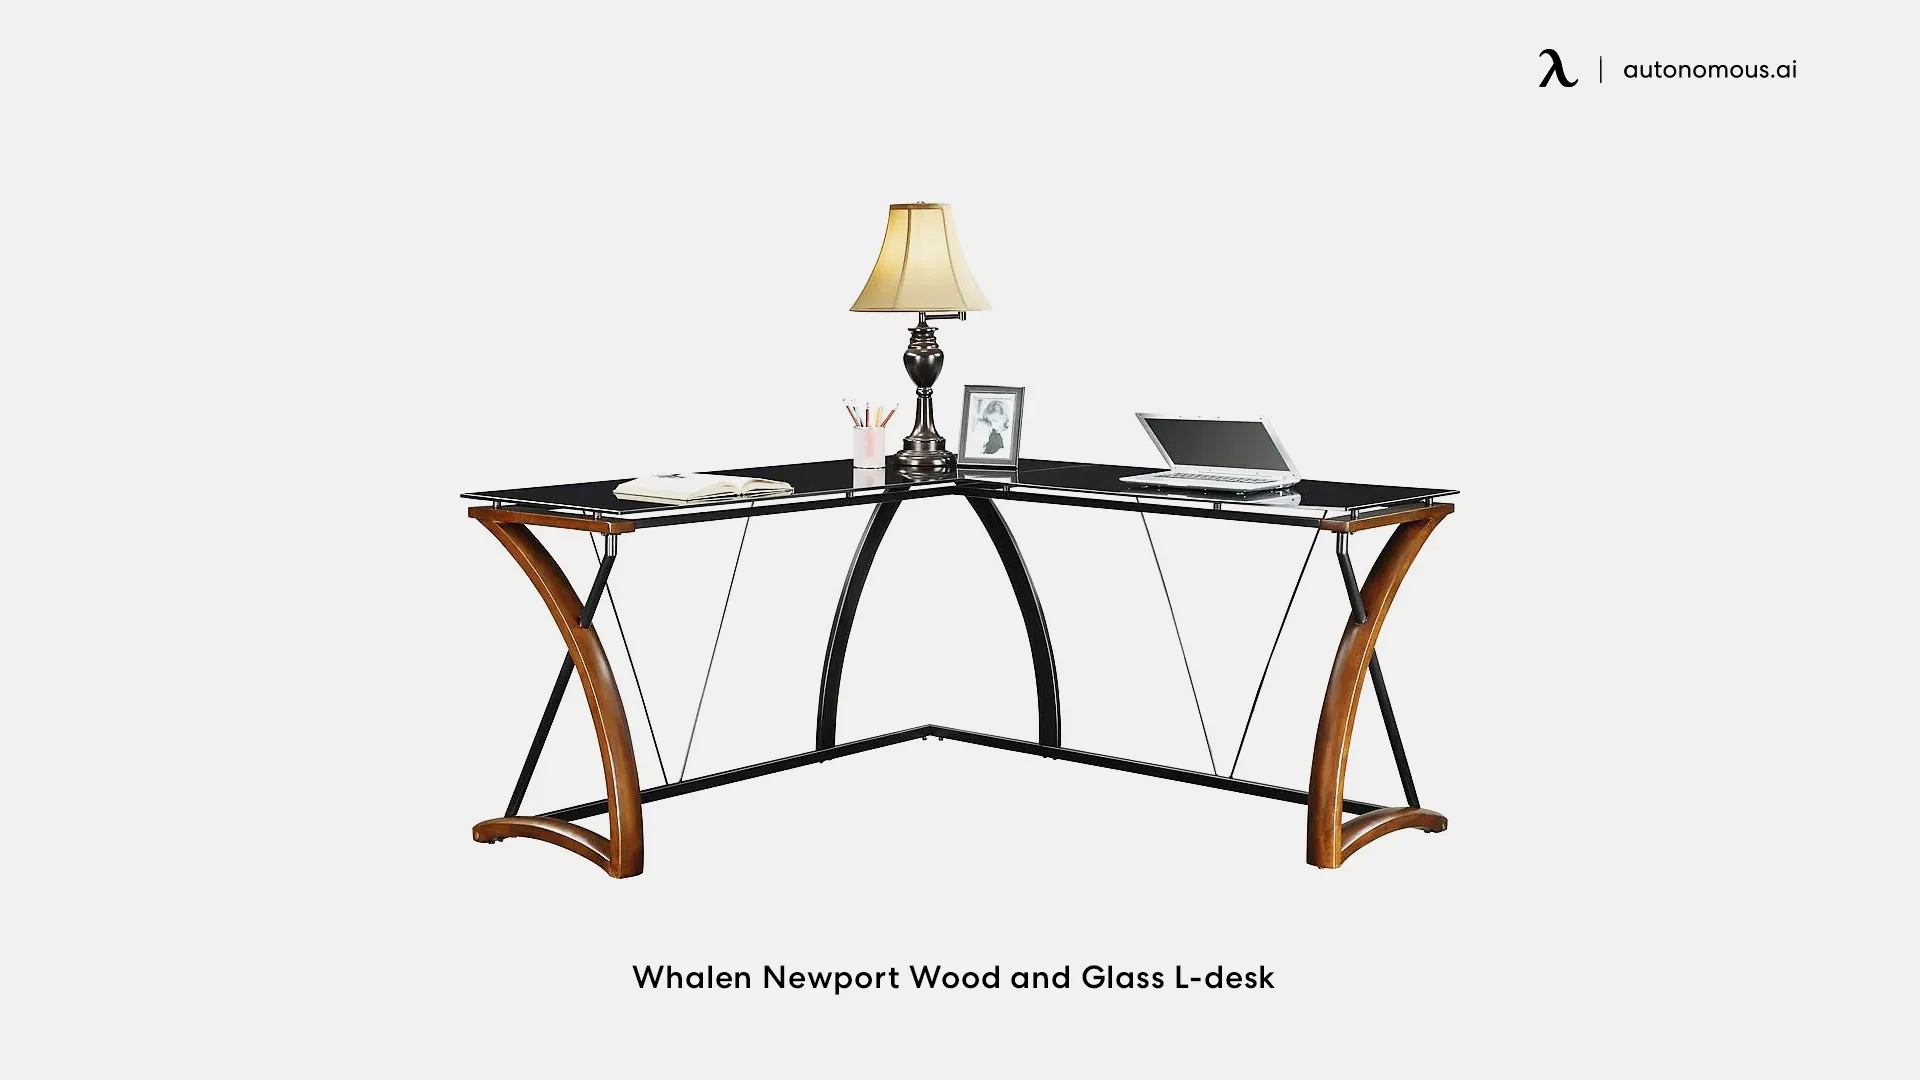 Whallen Newport Wood and Glass L-desk